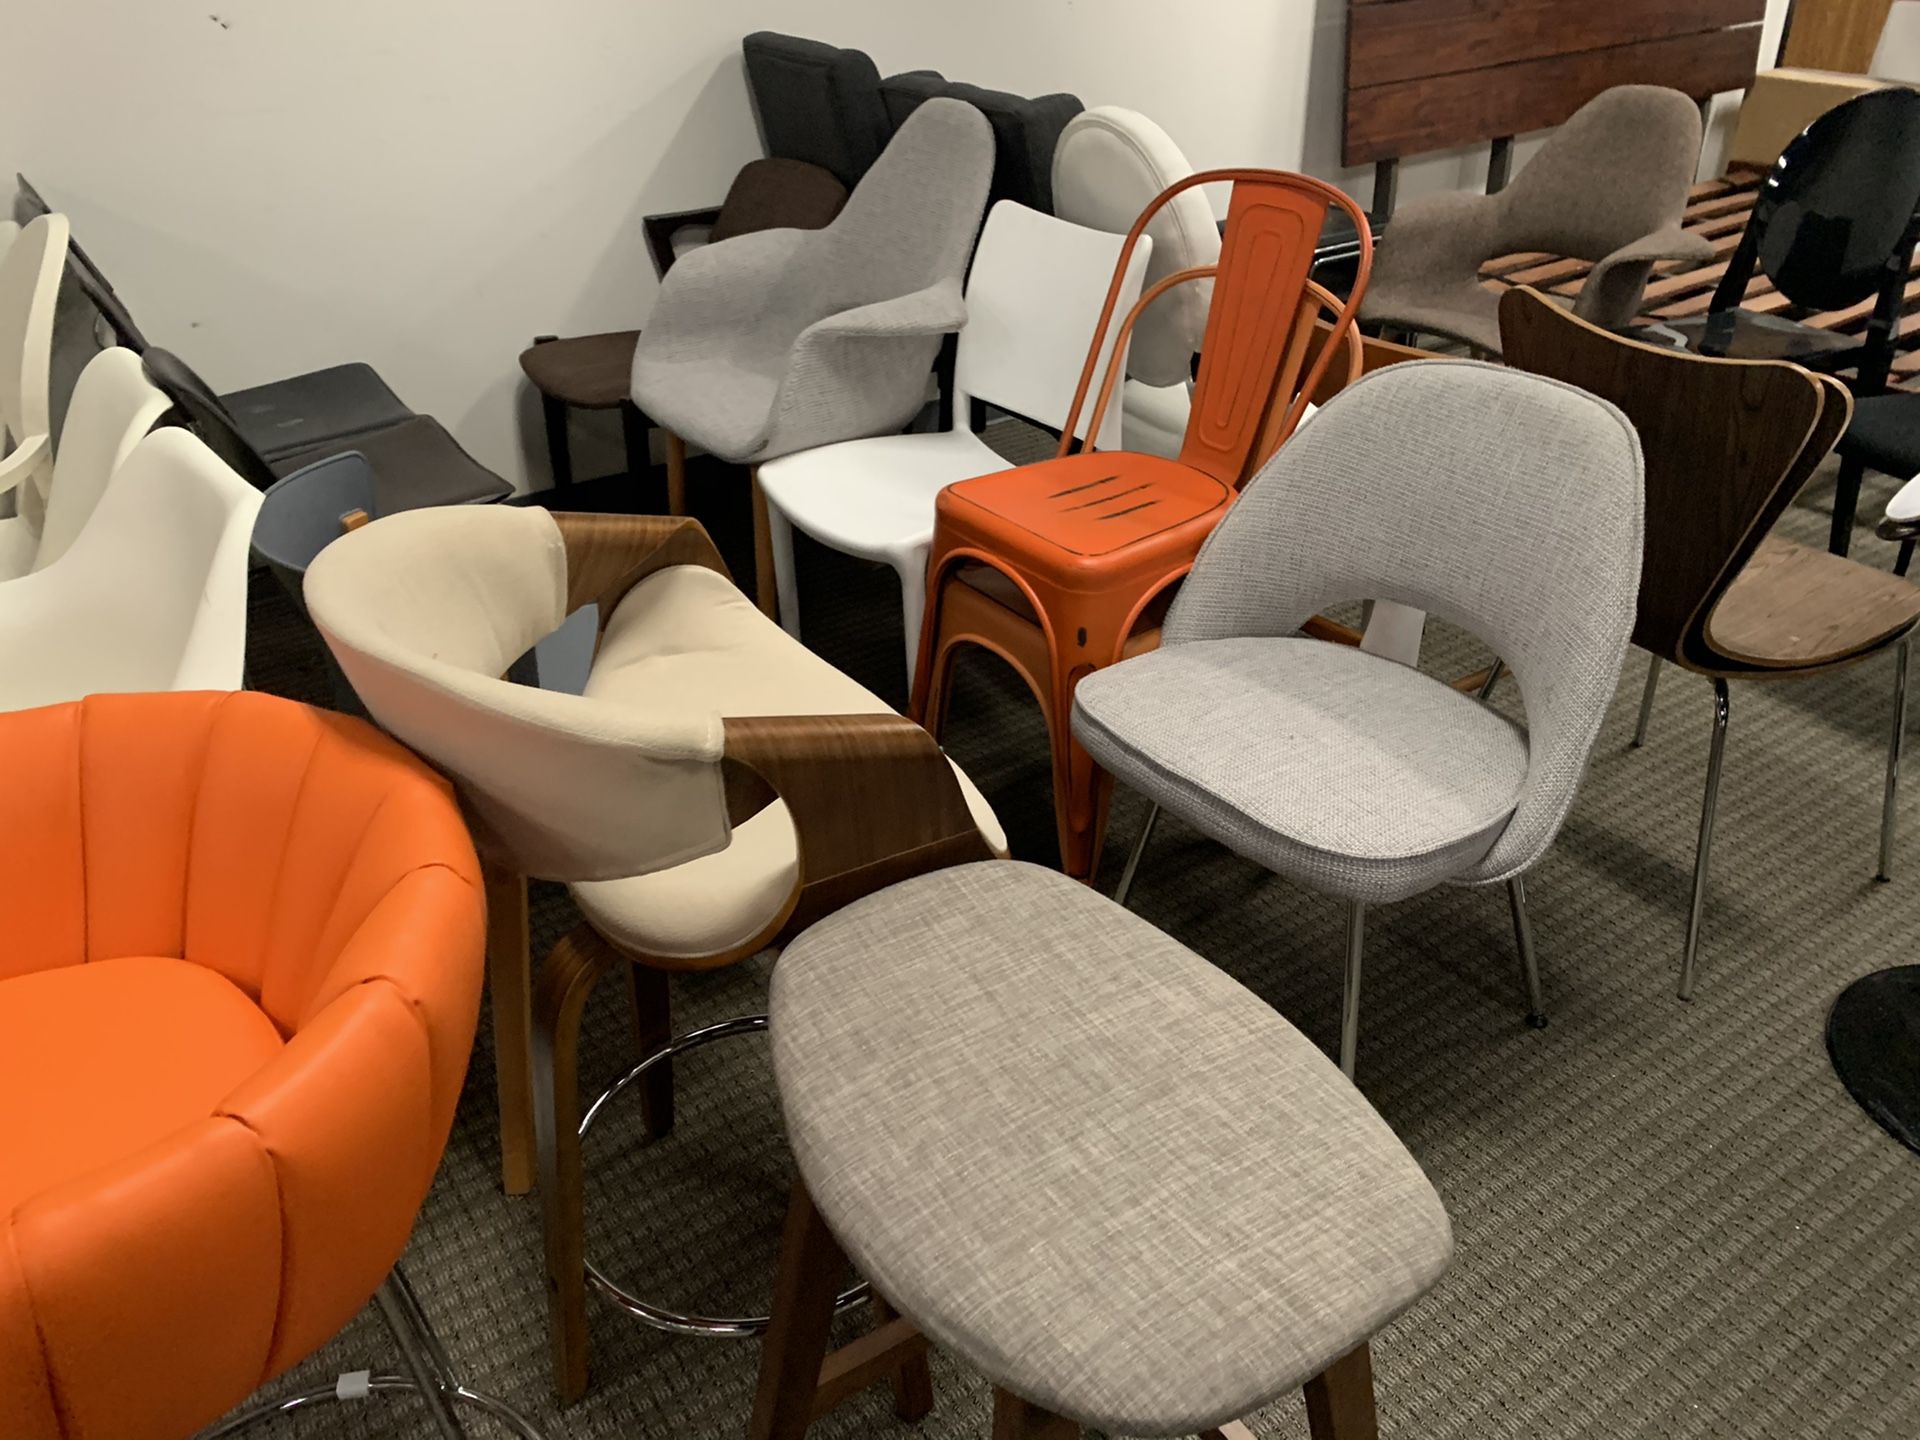 Various dining chairs from $25 to $55